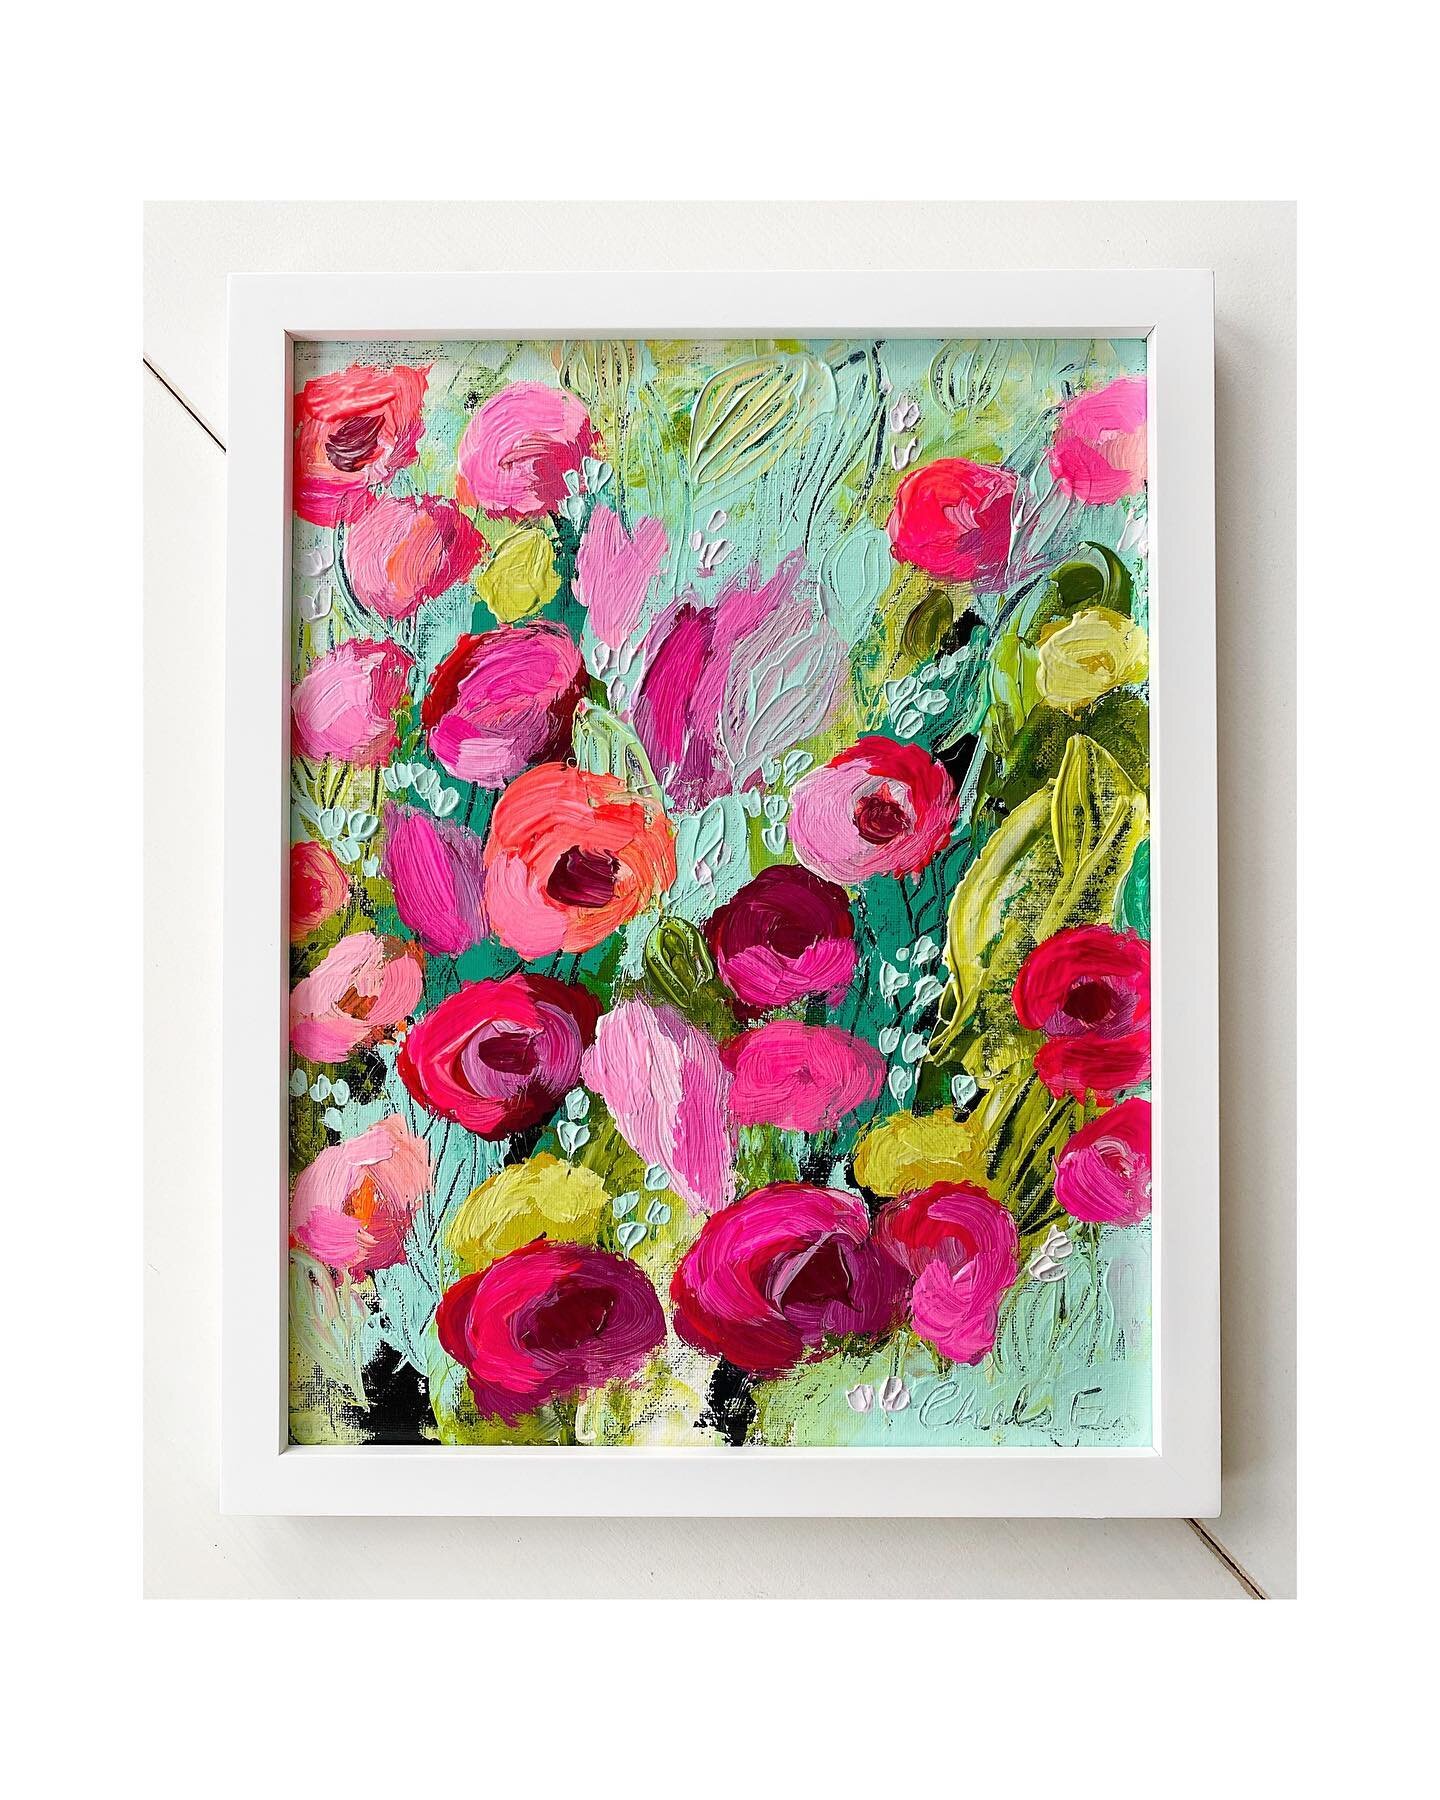 If you&rsquo;re needing to add a little spring fling to your walls, I still have some of these beauties framed and available on my site (link in bio)🌸🌺🍃
.
.
#springfever #artforsaleonline #paletteknifepainting #framedartwork #artforthehome #artfor